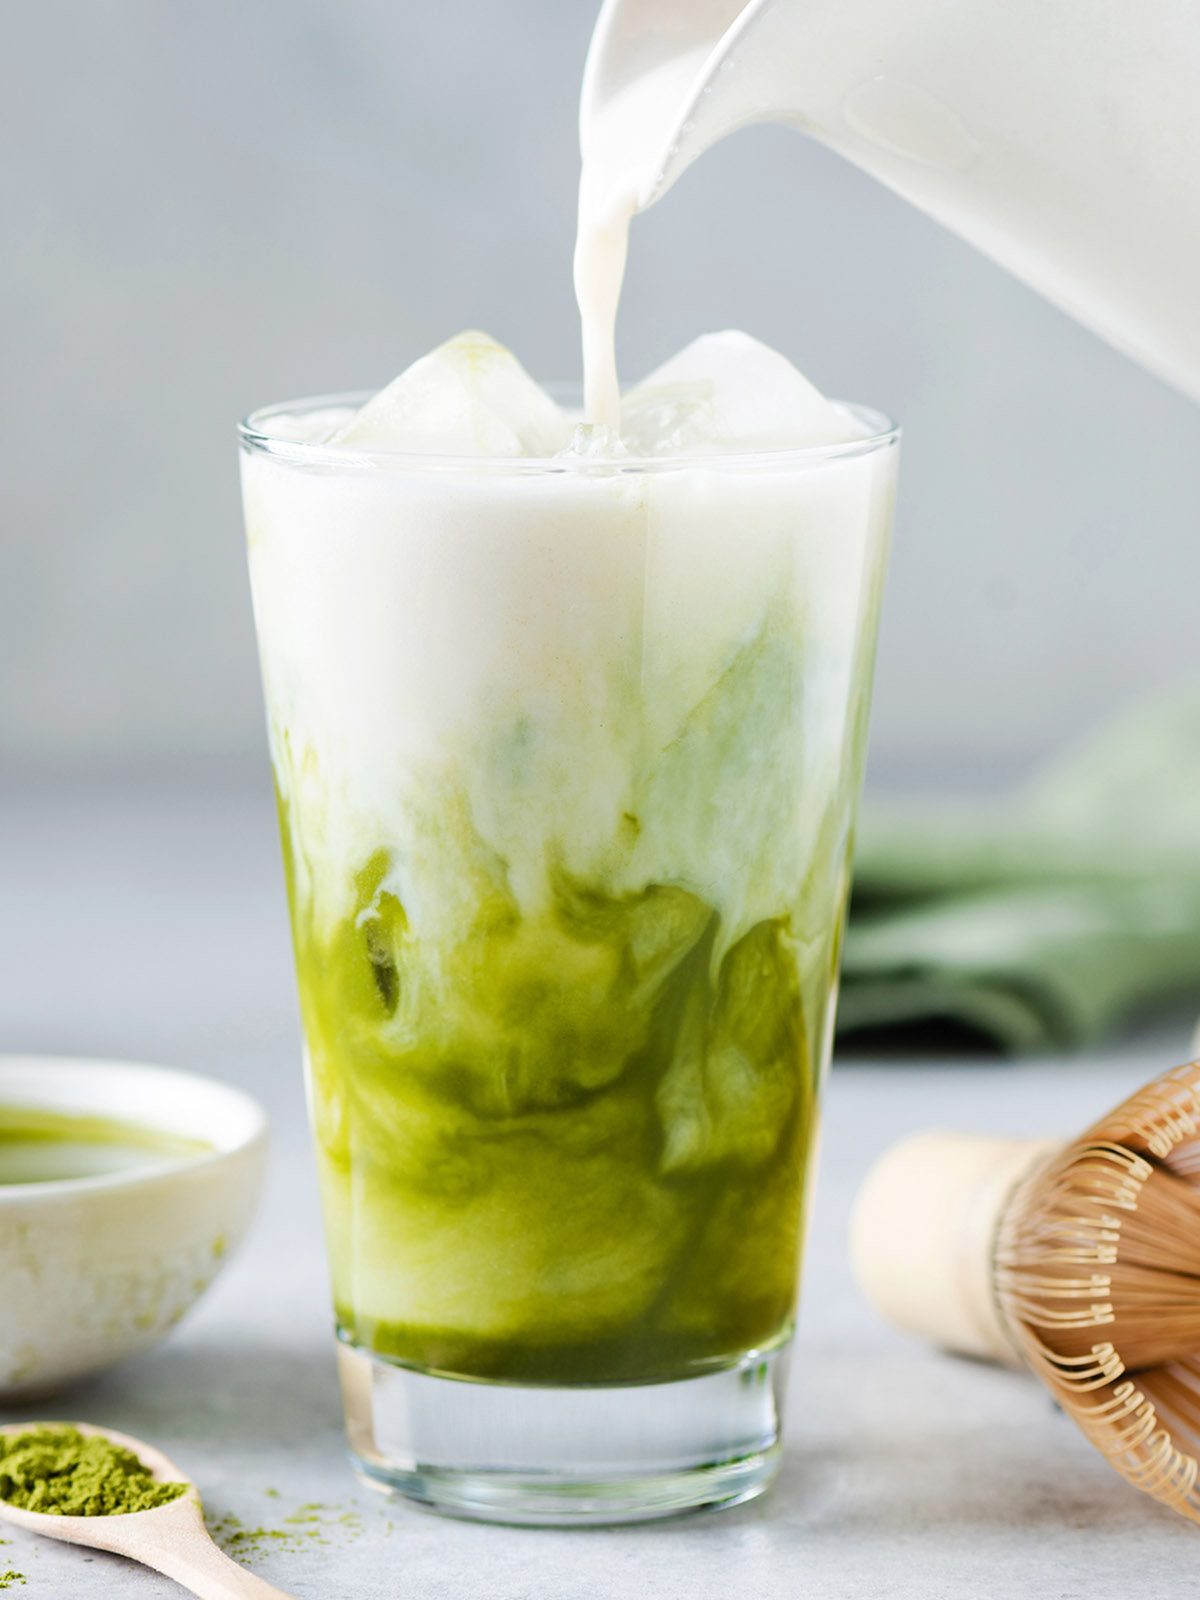 Soy milk pouring in matcha ice tea.